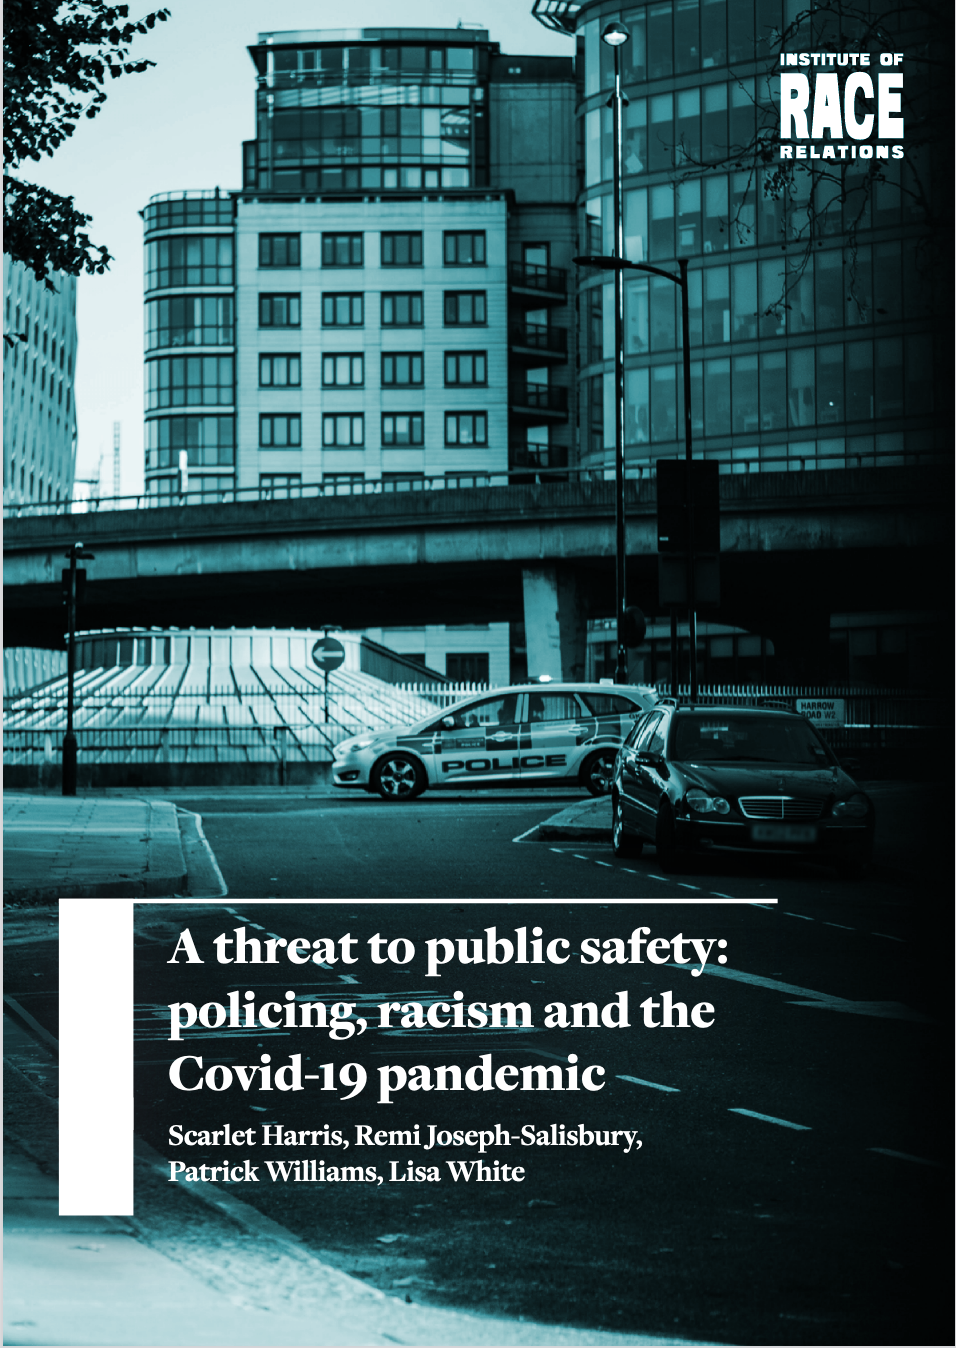 A threat to public safety: policing, racism and the Covid-19 pandemic